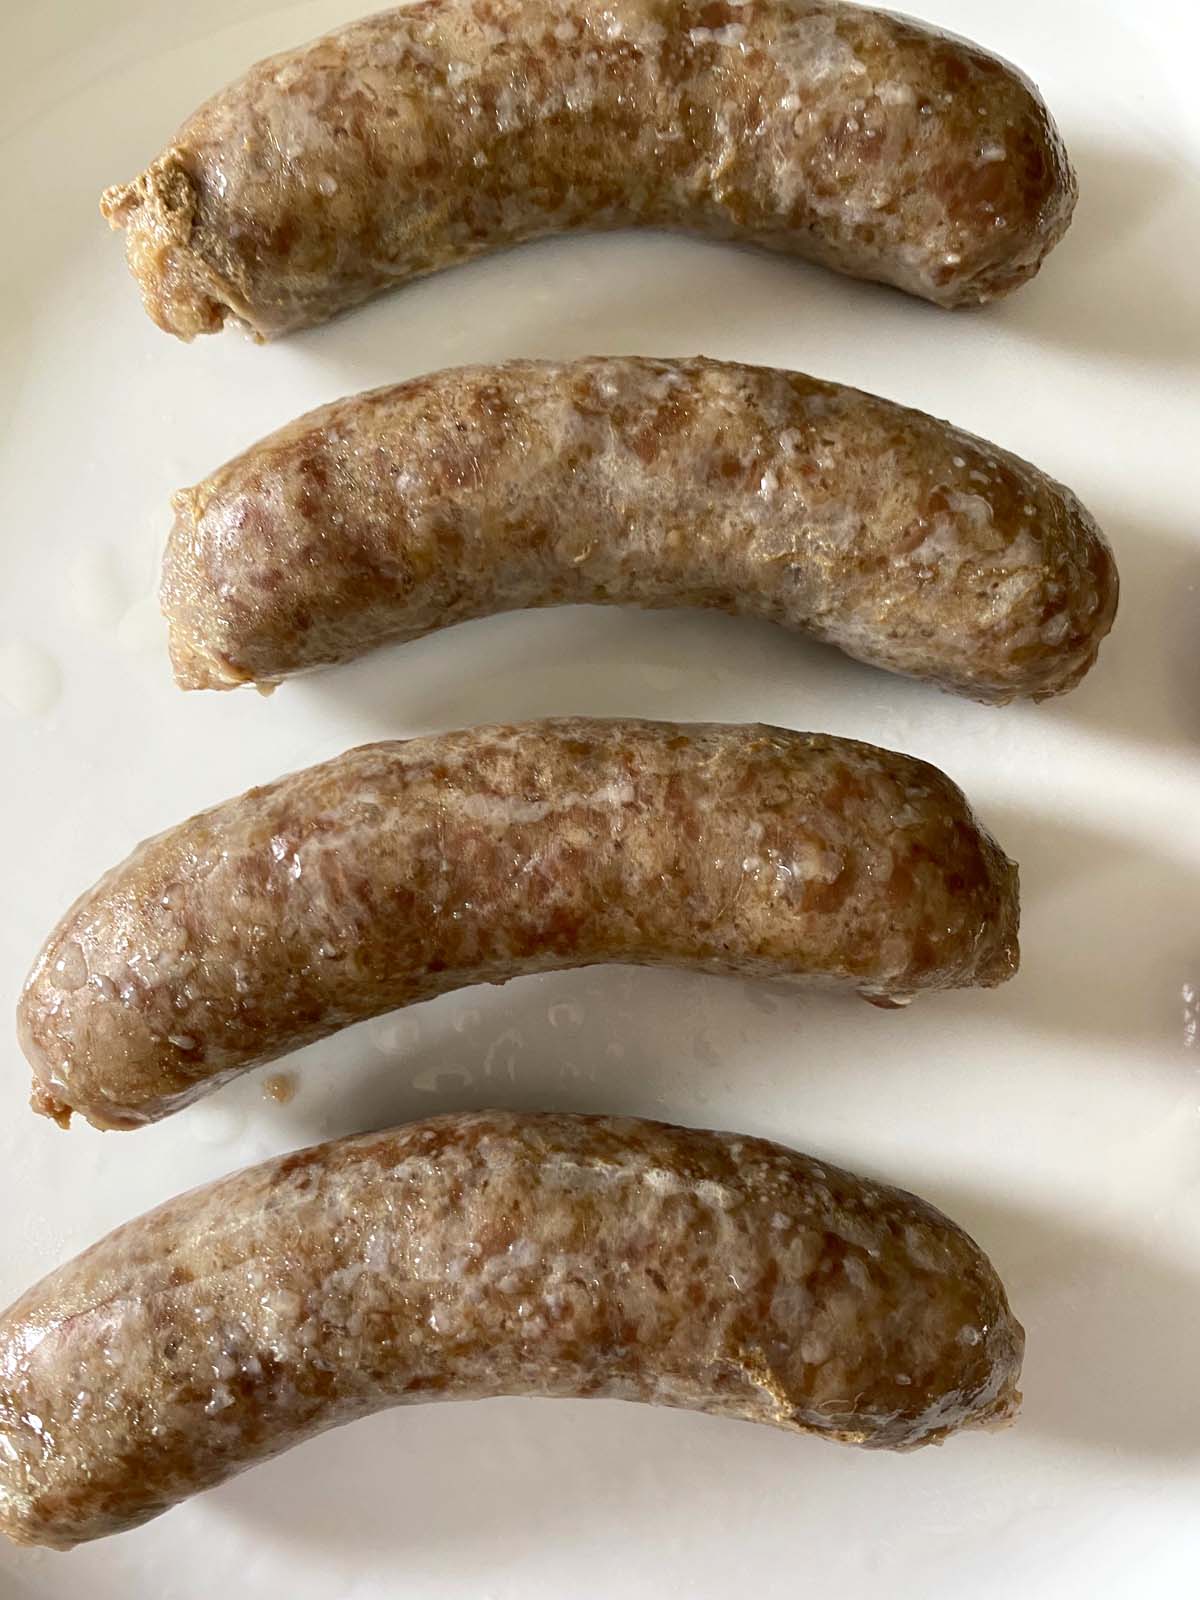 4 cooked brats on a plate.